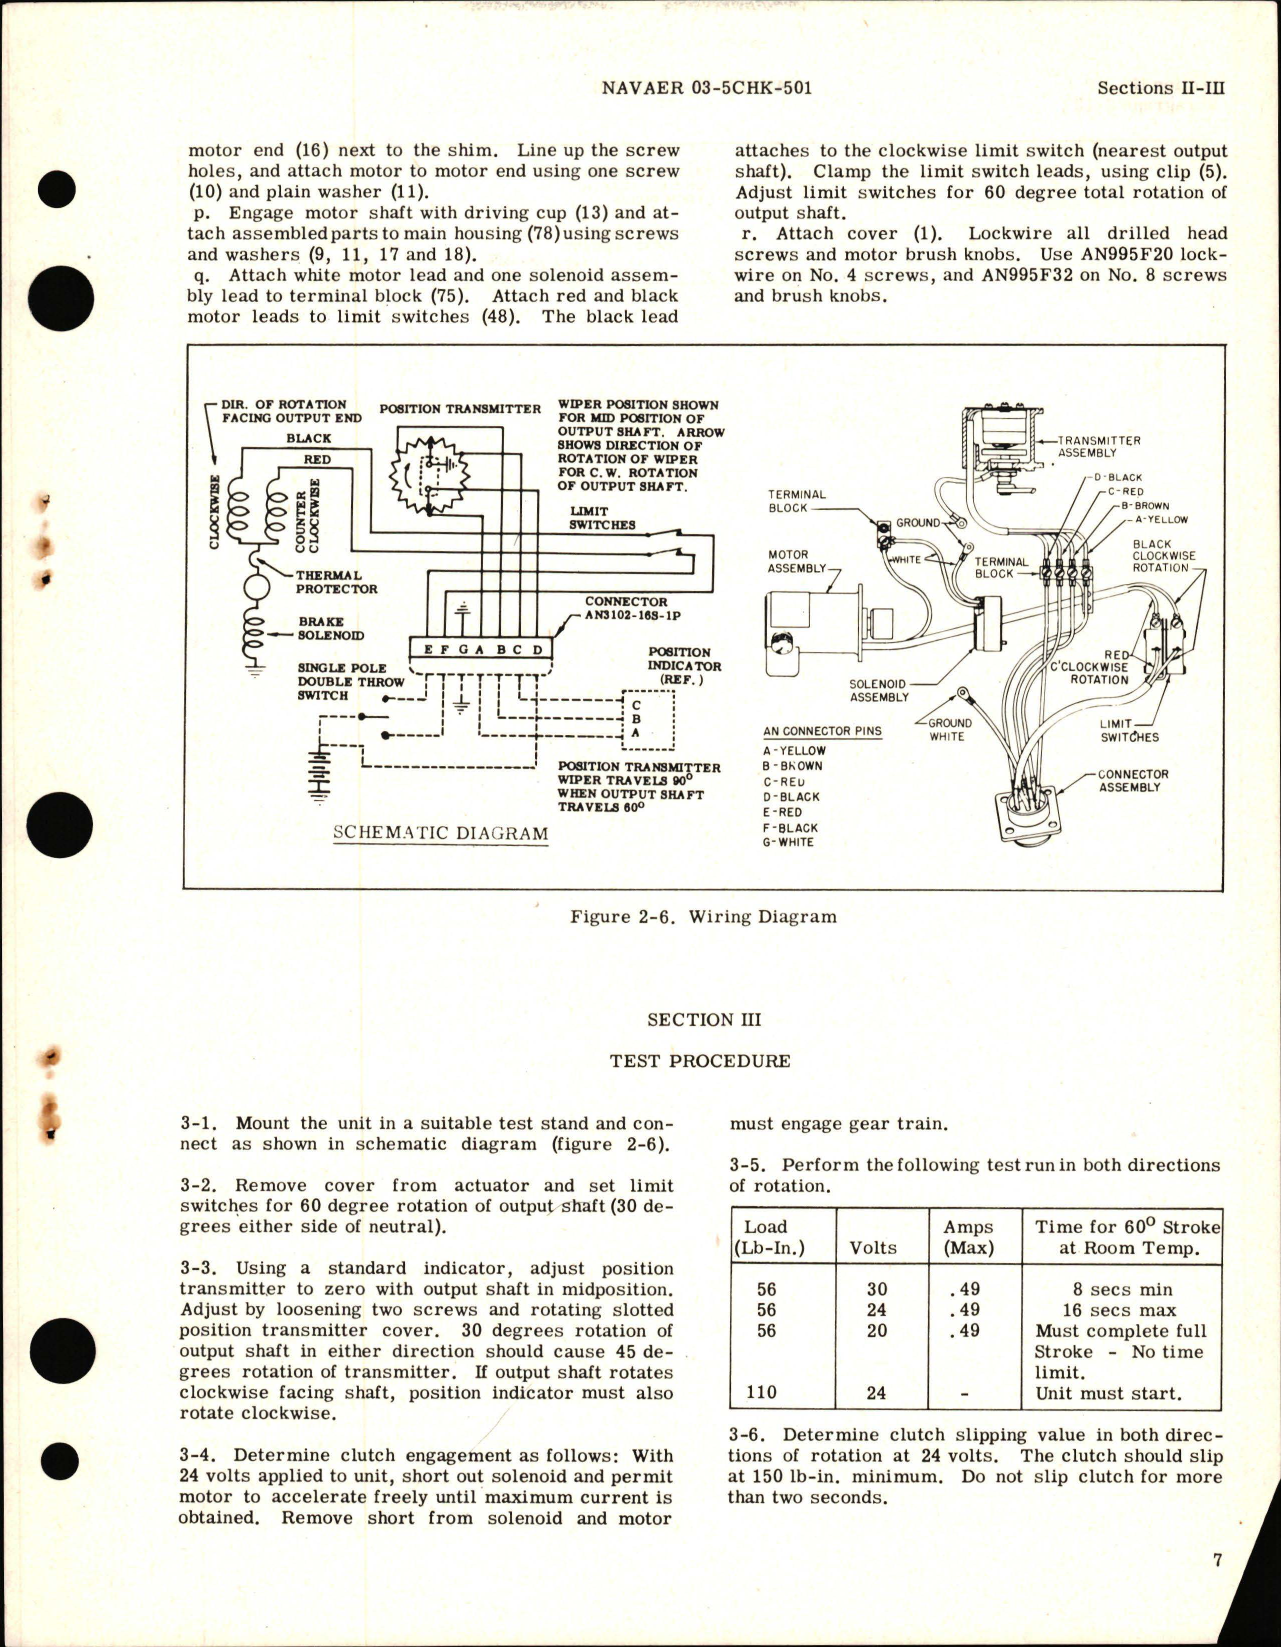 Sample page 9 from AirCorps Library document: Overhaul Instructions for Actuator Assembly, Aileron Artificial Feel Trim Part Numbers AL-1910 and AL-1423-1